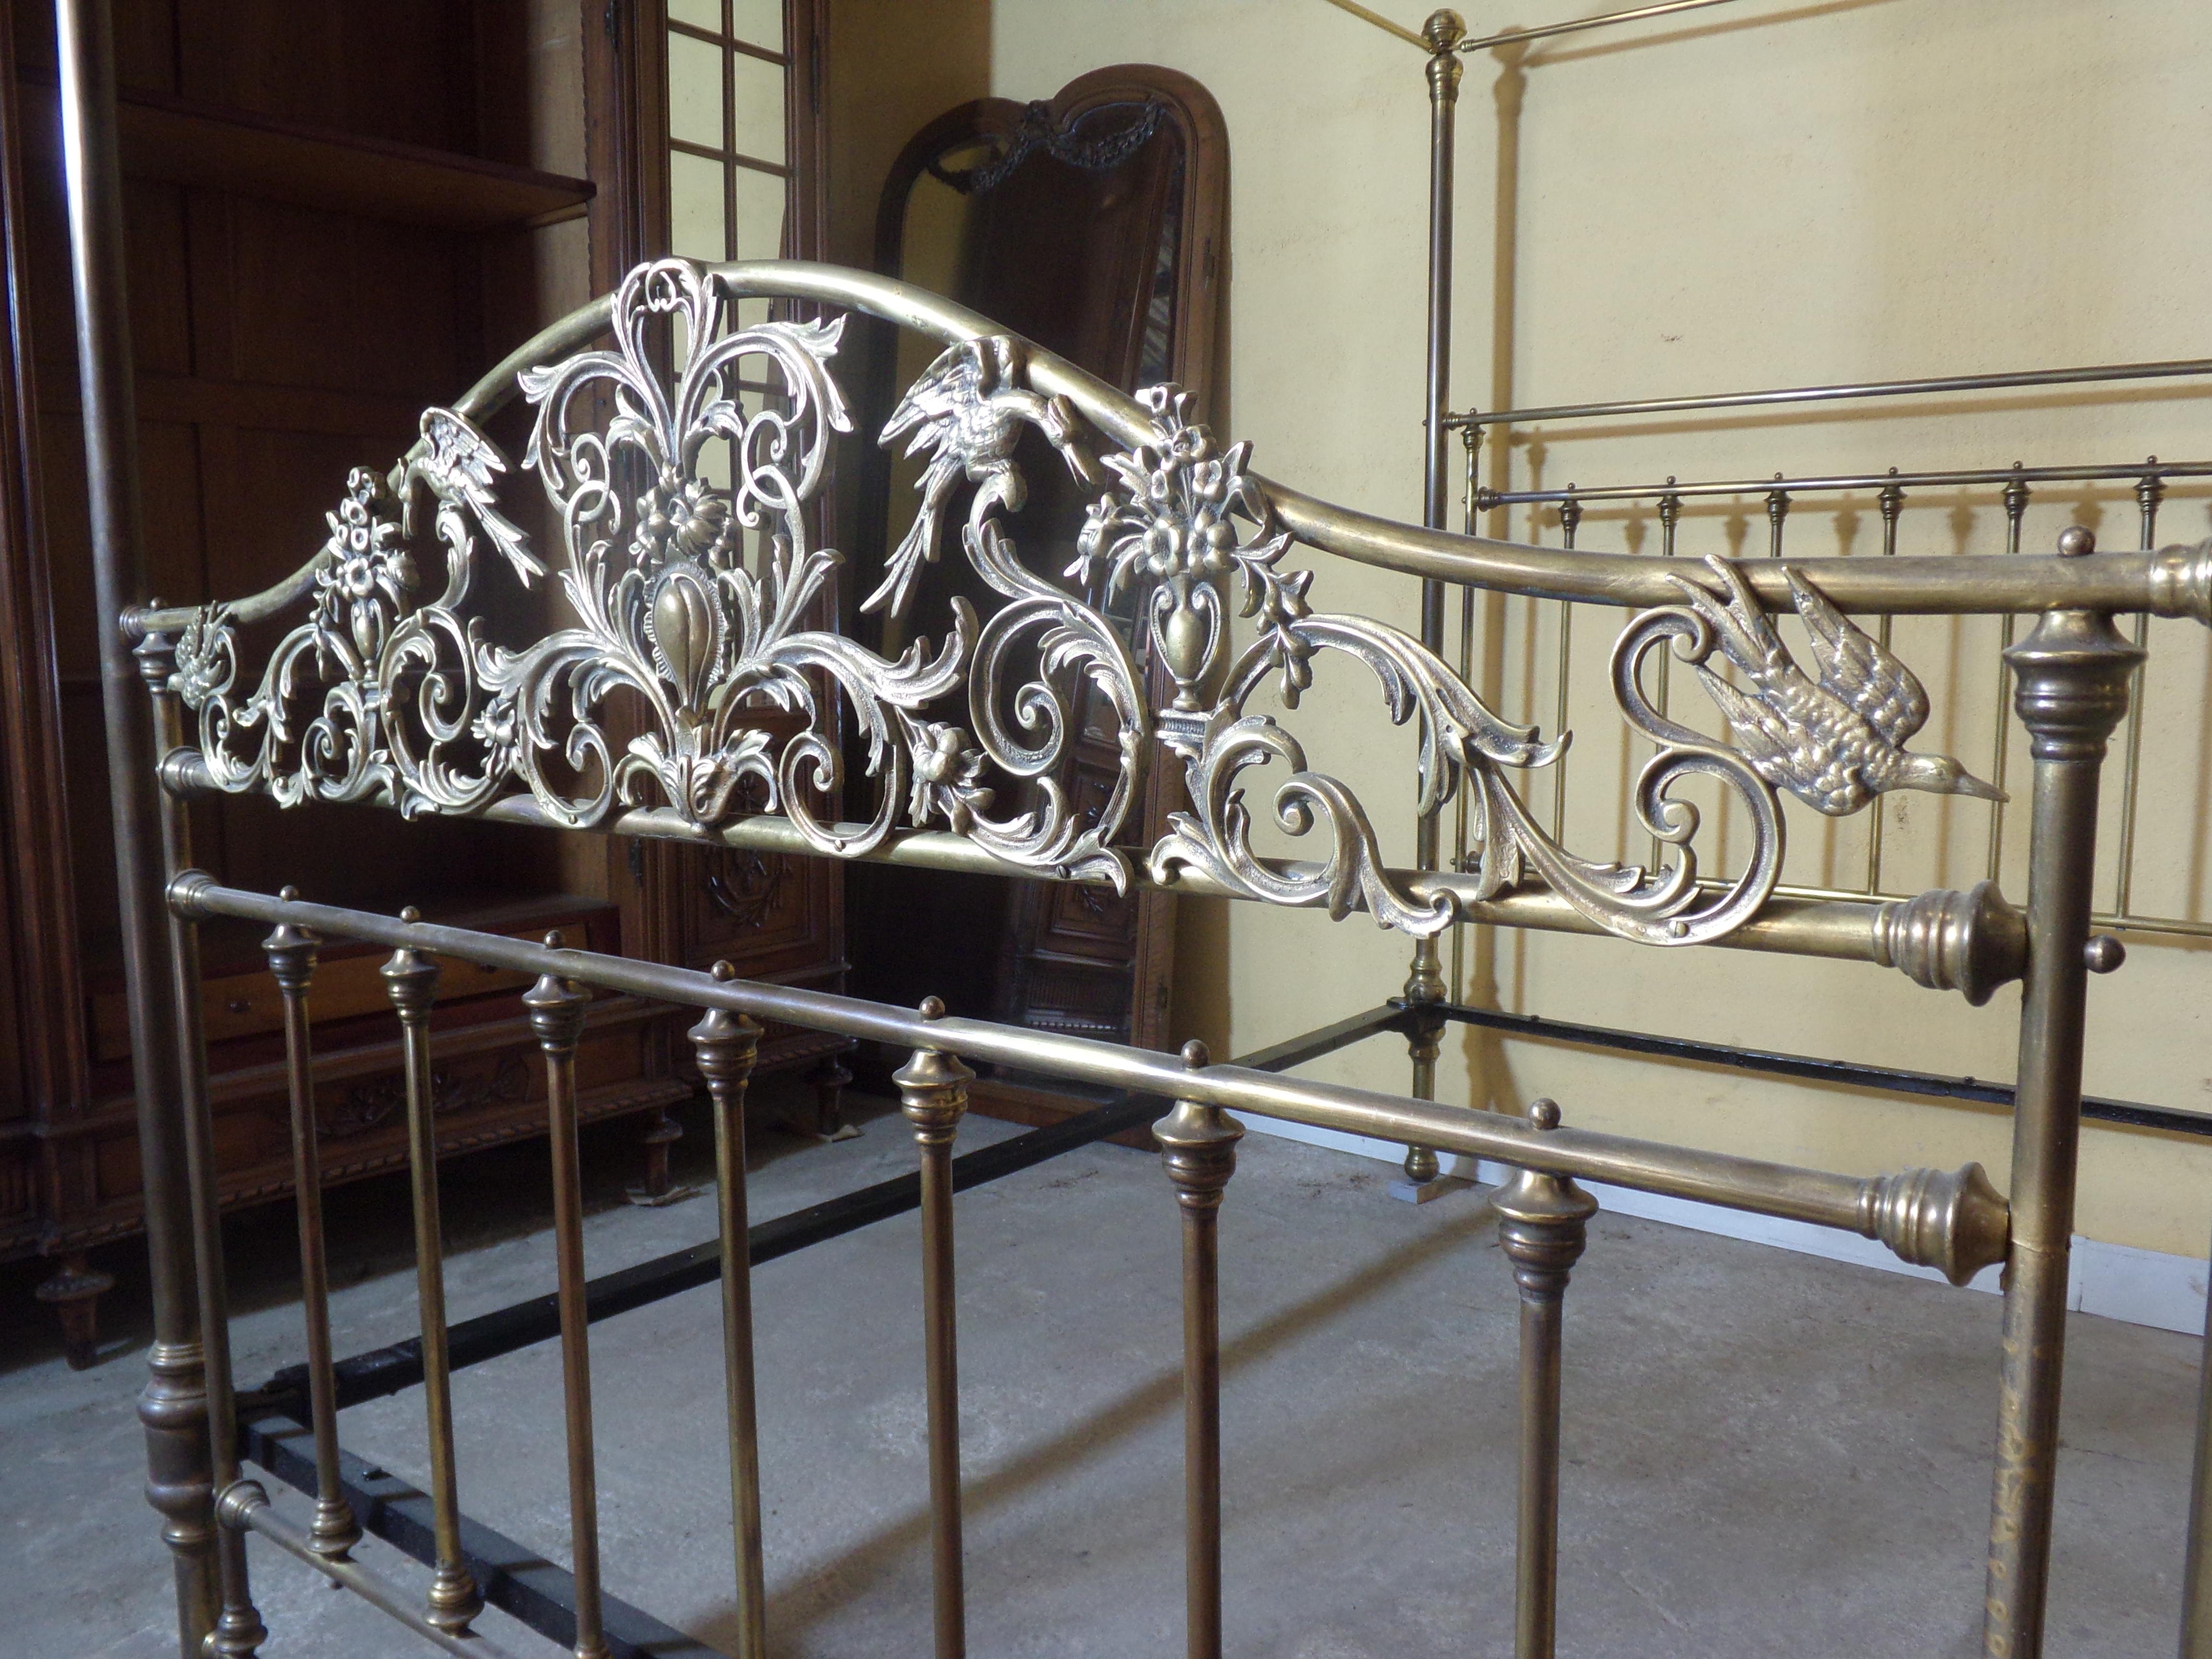 A beautiful all original Queen Size Victorian Four Poster bed beds like this are now very hard to find this example has fine castings of foliage and exotic birds on the footboard.
size
Width 60